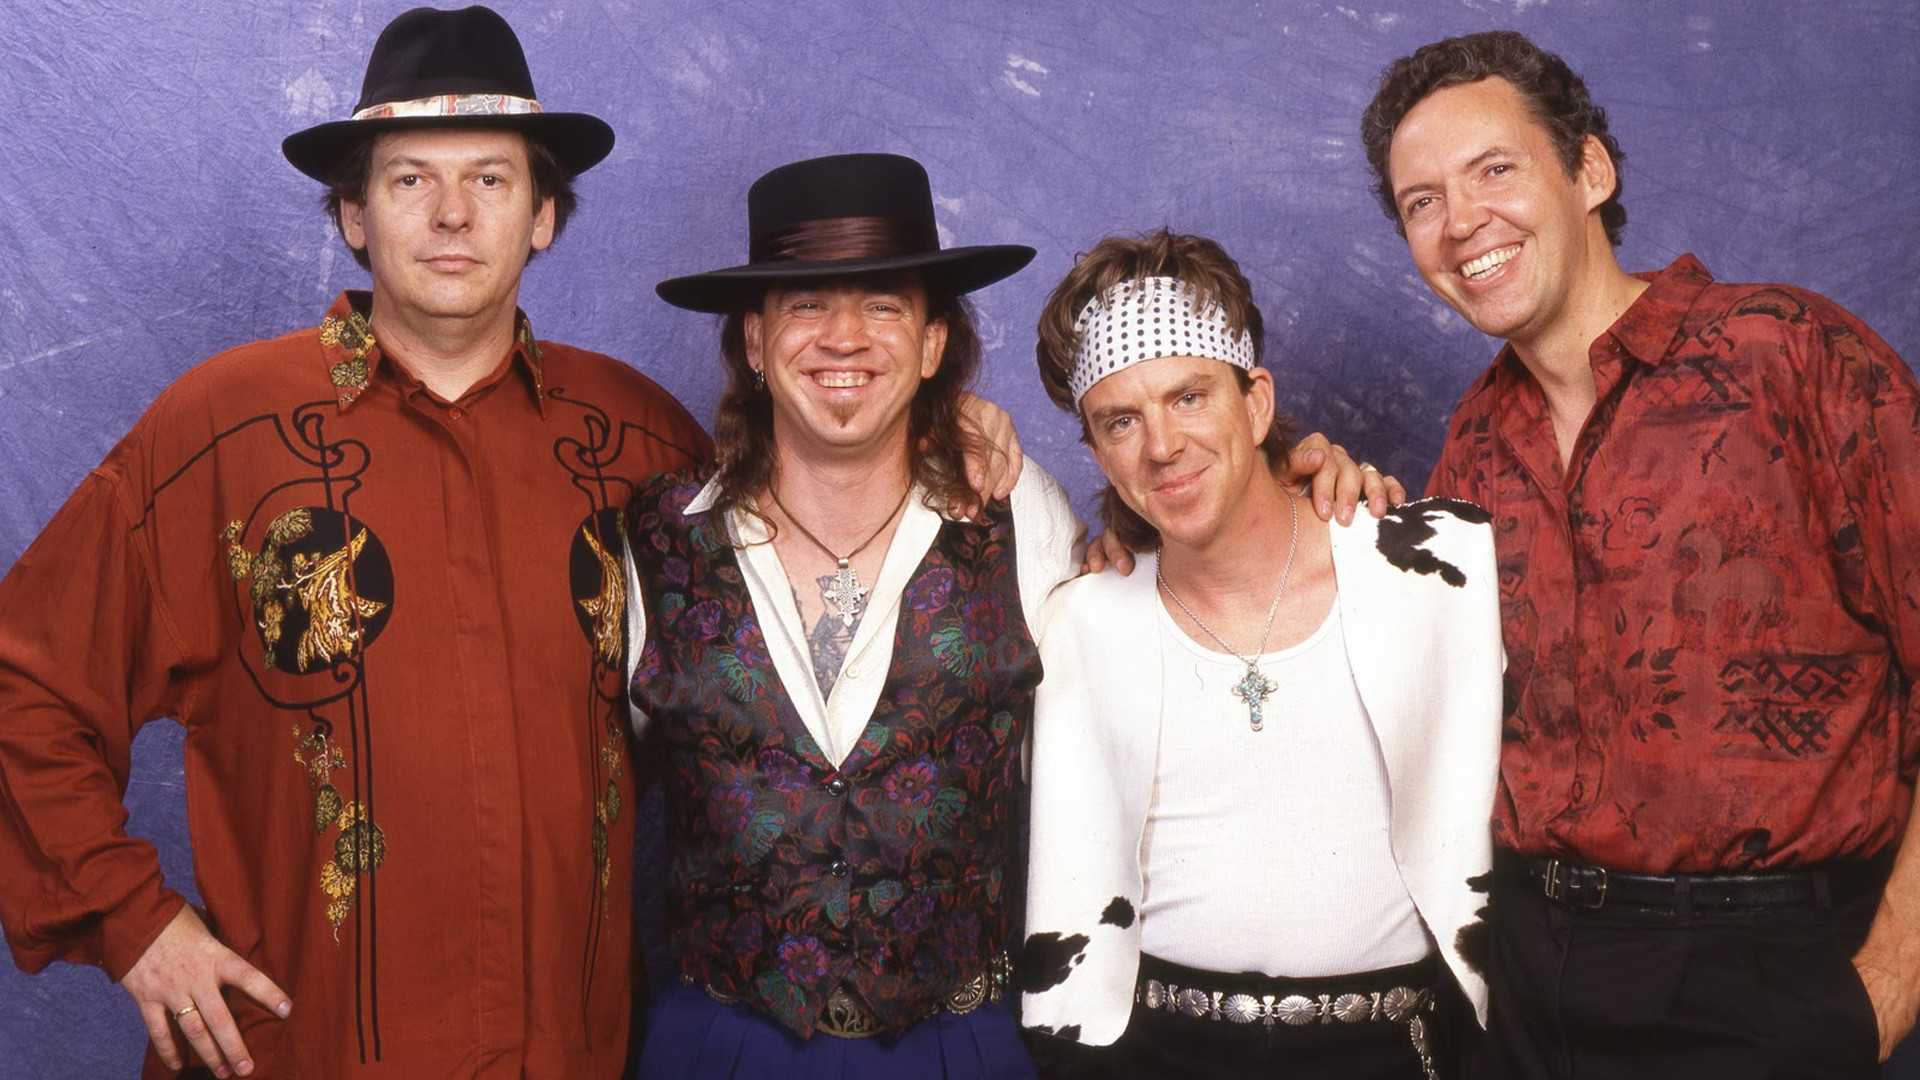 1920x1080 Stevie Ray Vaughan and Double Trouble backdrop wallpaper